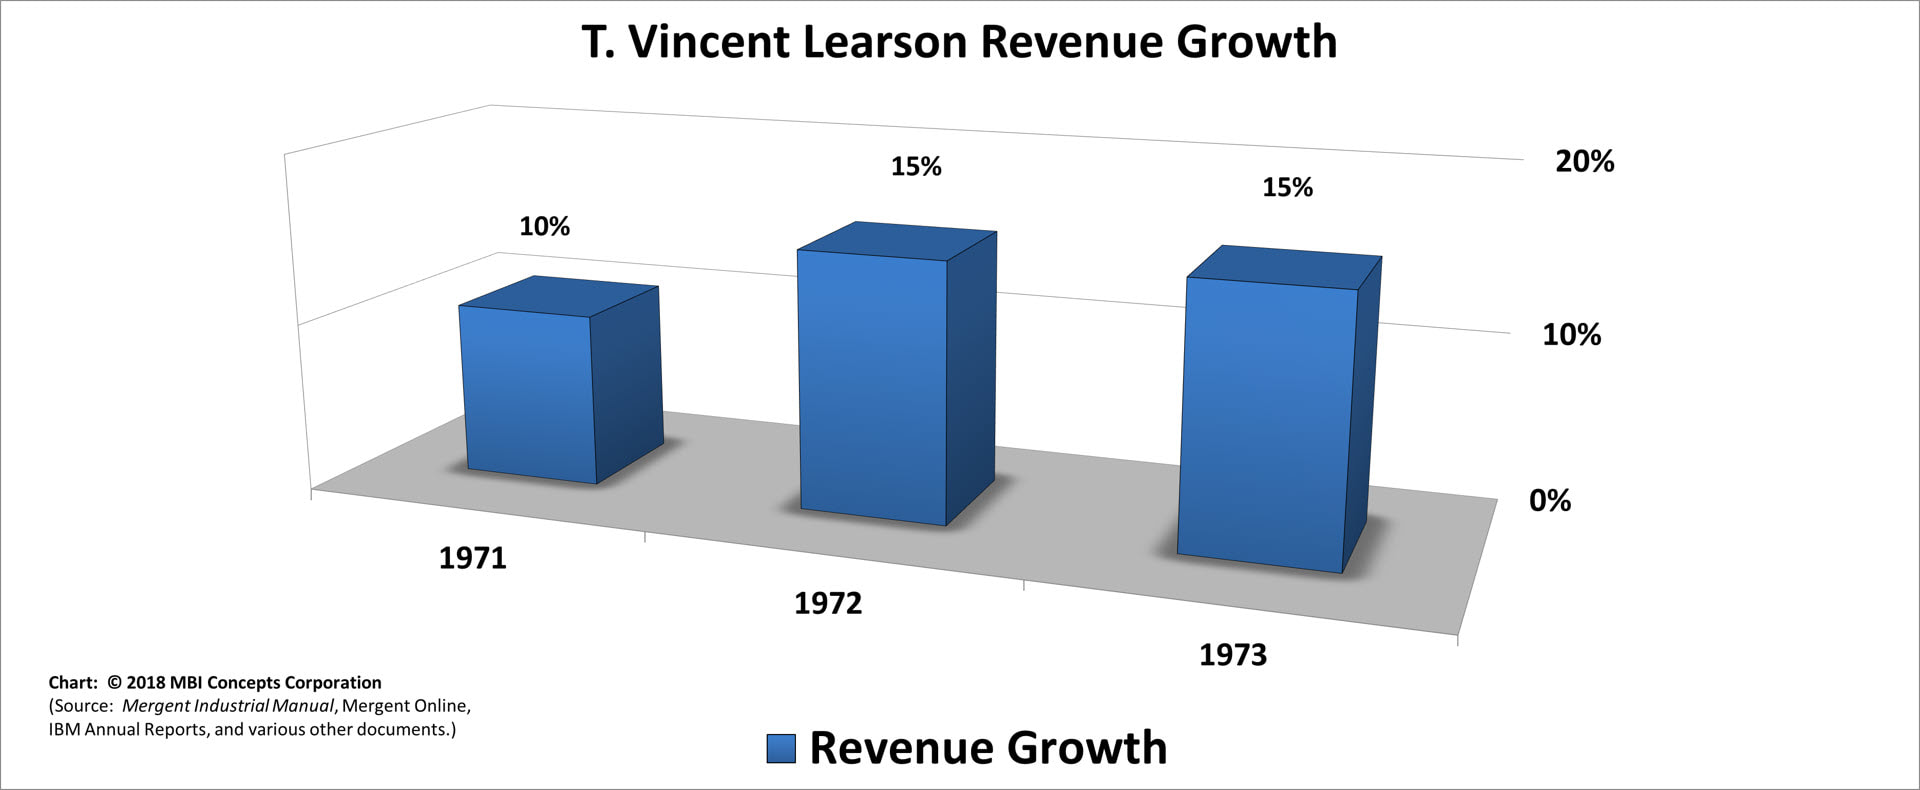 A color bar chart showing IBM's yearly revenue growth from 1971 to 1973 for T. Vincent (Vin) Learson.